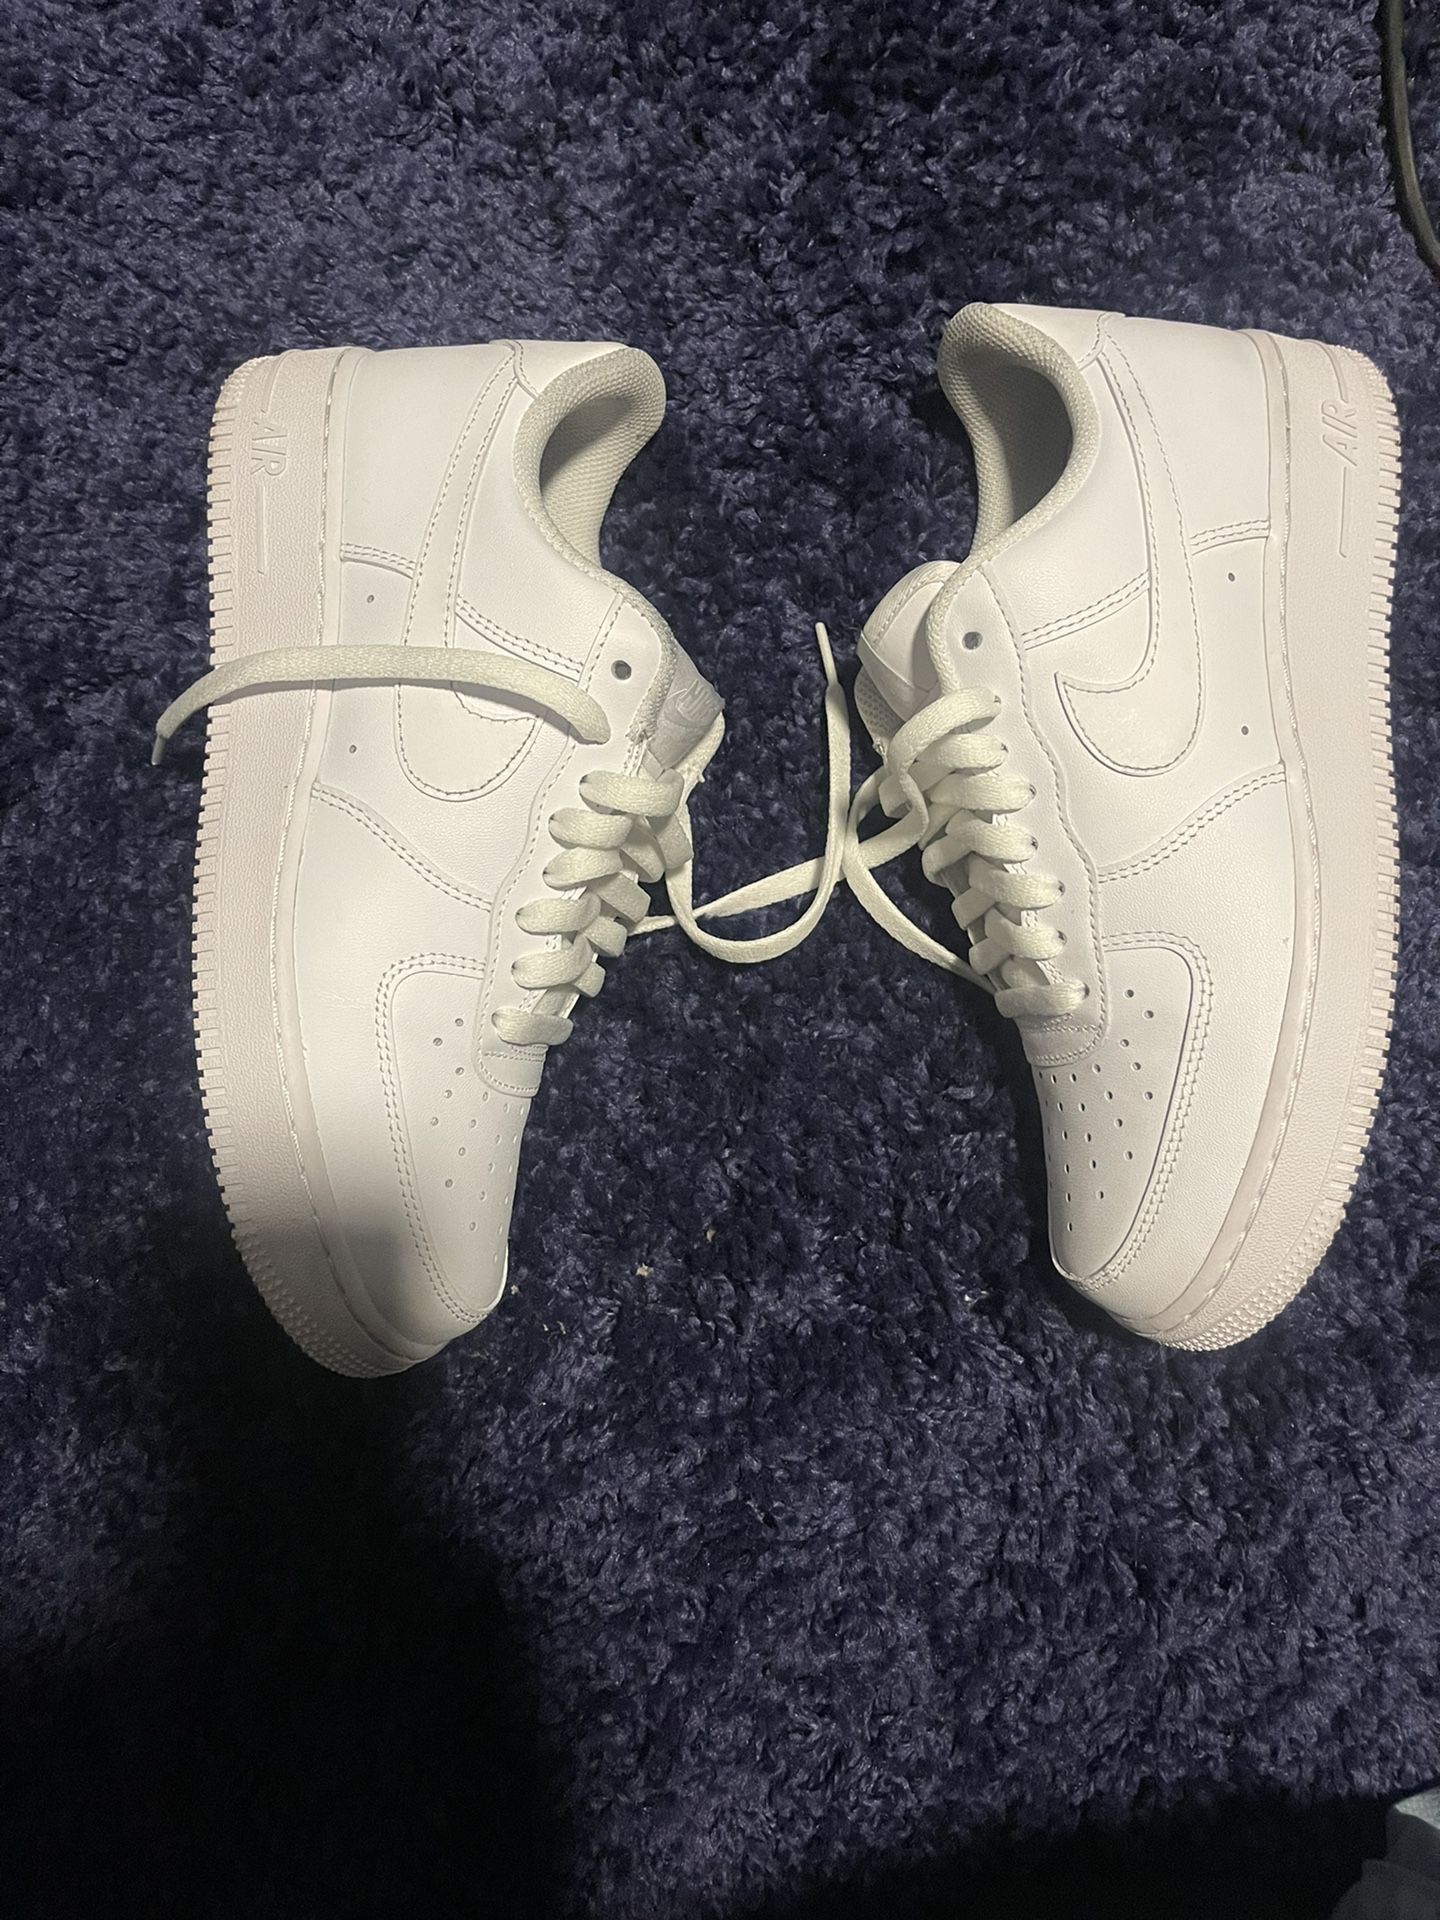 Nike Air Force 1s Size 8.5 Mens White/ White for Sale in Las Vegas